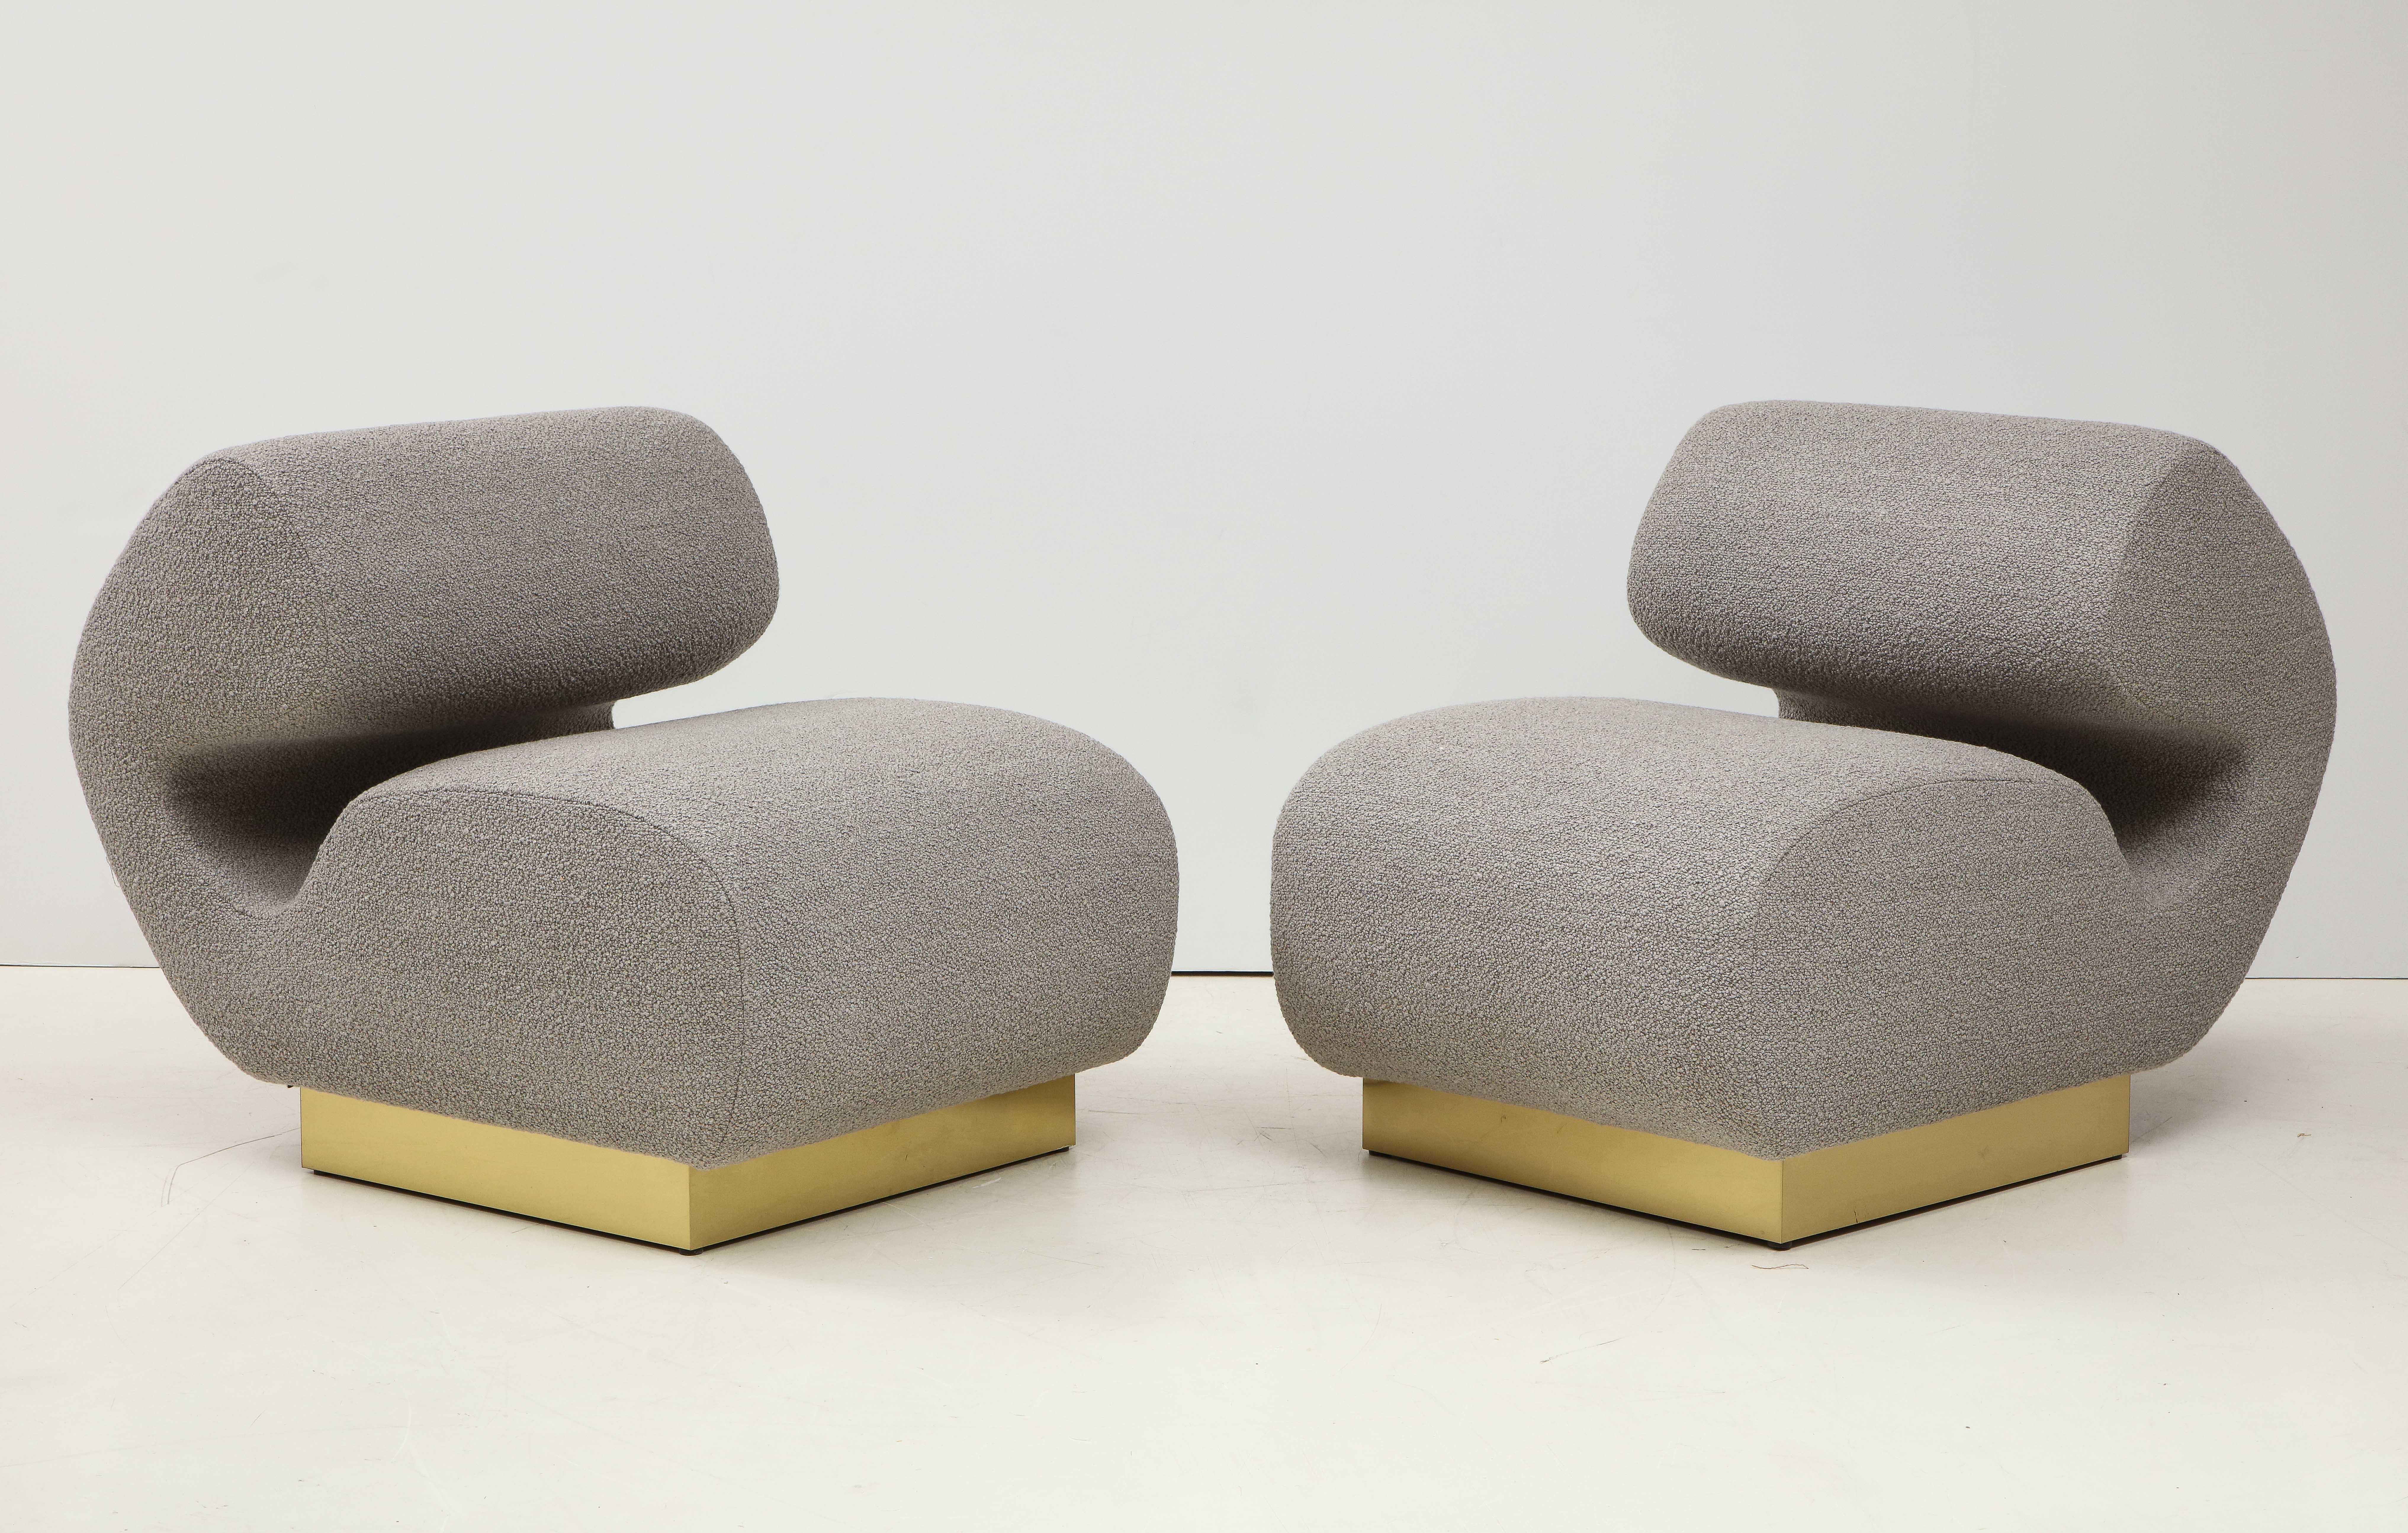 Pair of grey bouclé sculptural lounge or slipper chairs custom made in Florence, Italy by a master furniture artisan. Superb craftsmanship and design lines. These large and roomy lounge chairs are extremely comfortable and sit atop a square brass